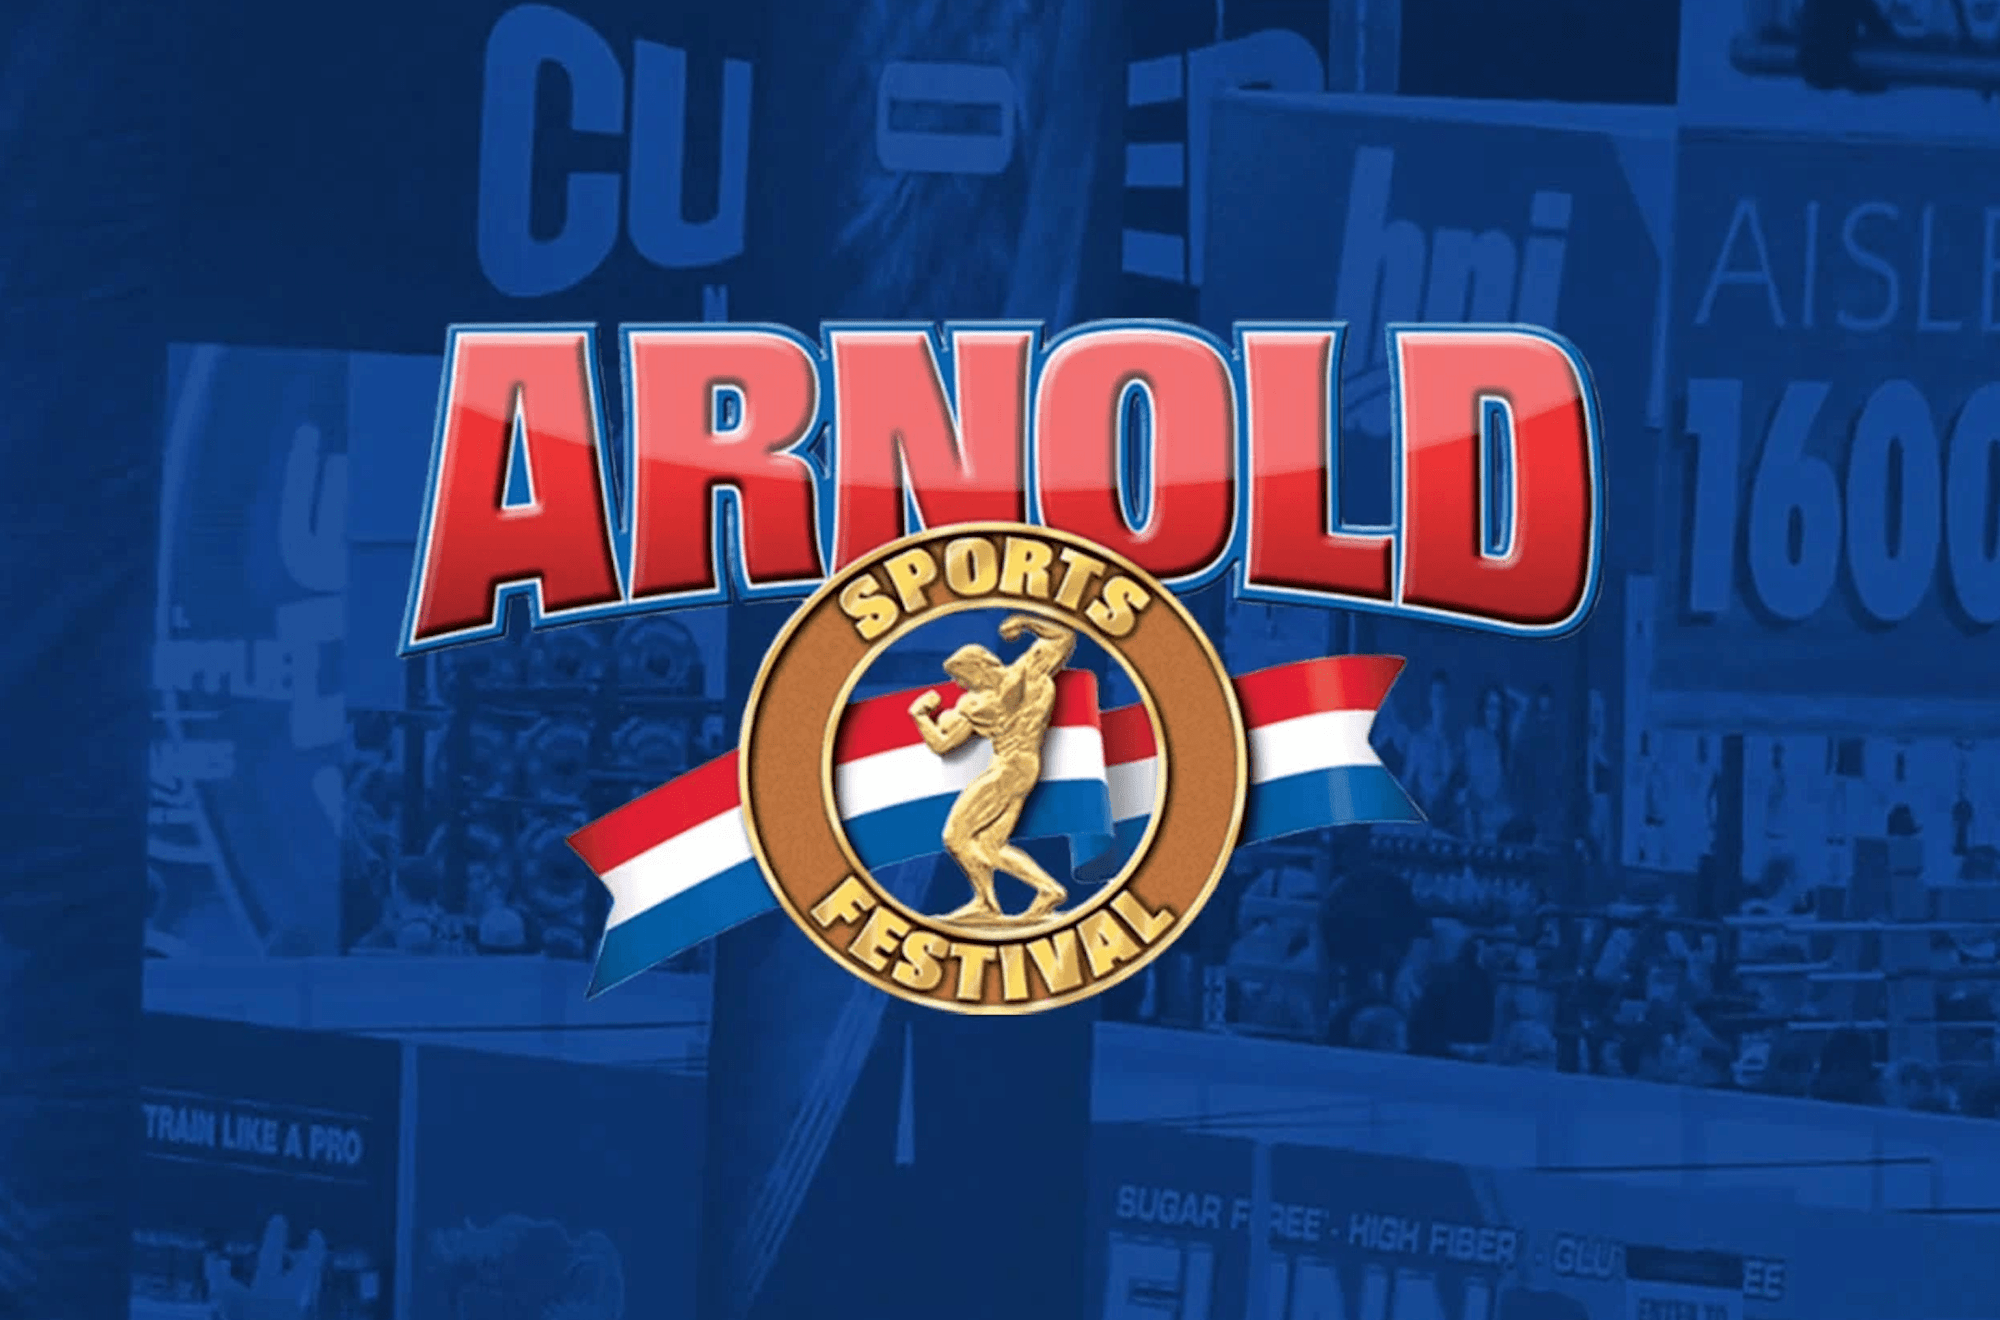 Our 11th Hour Arnold Predictions